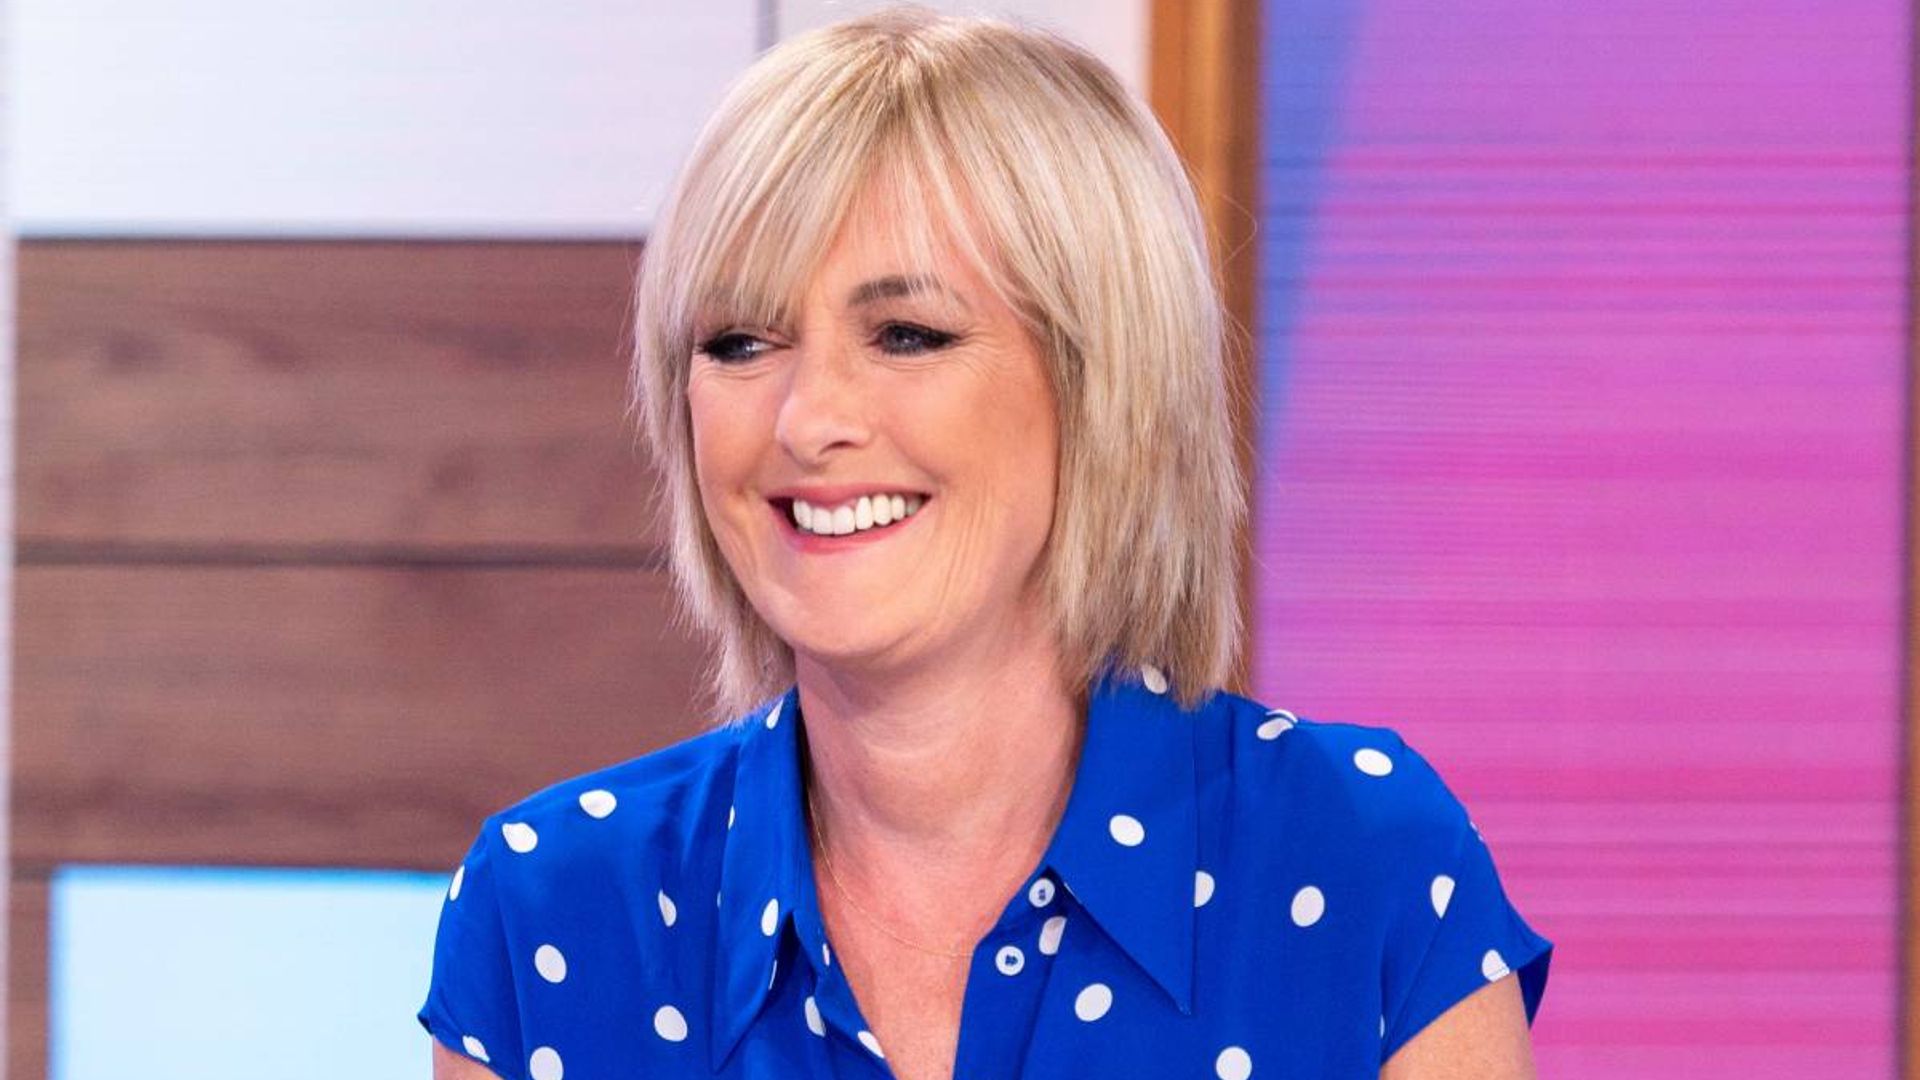 Jane Moore is praised for promoting body confidence with new bikini photo